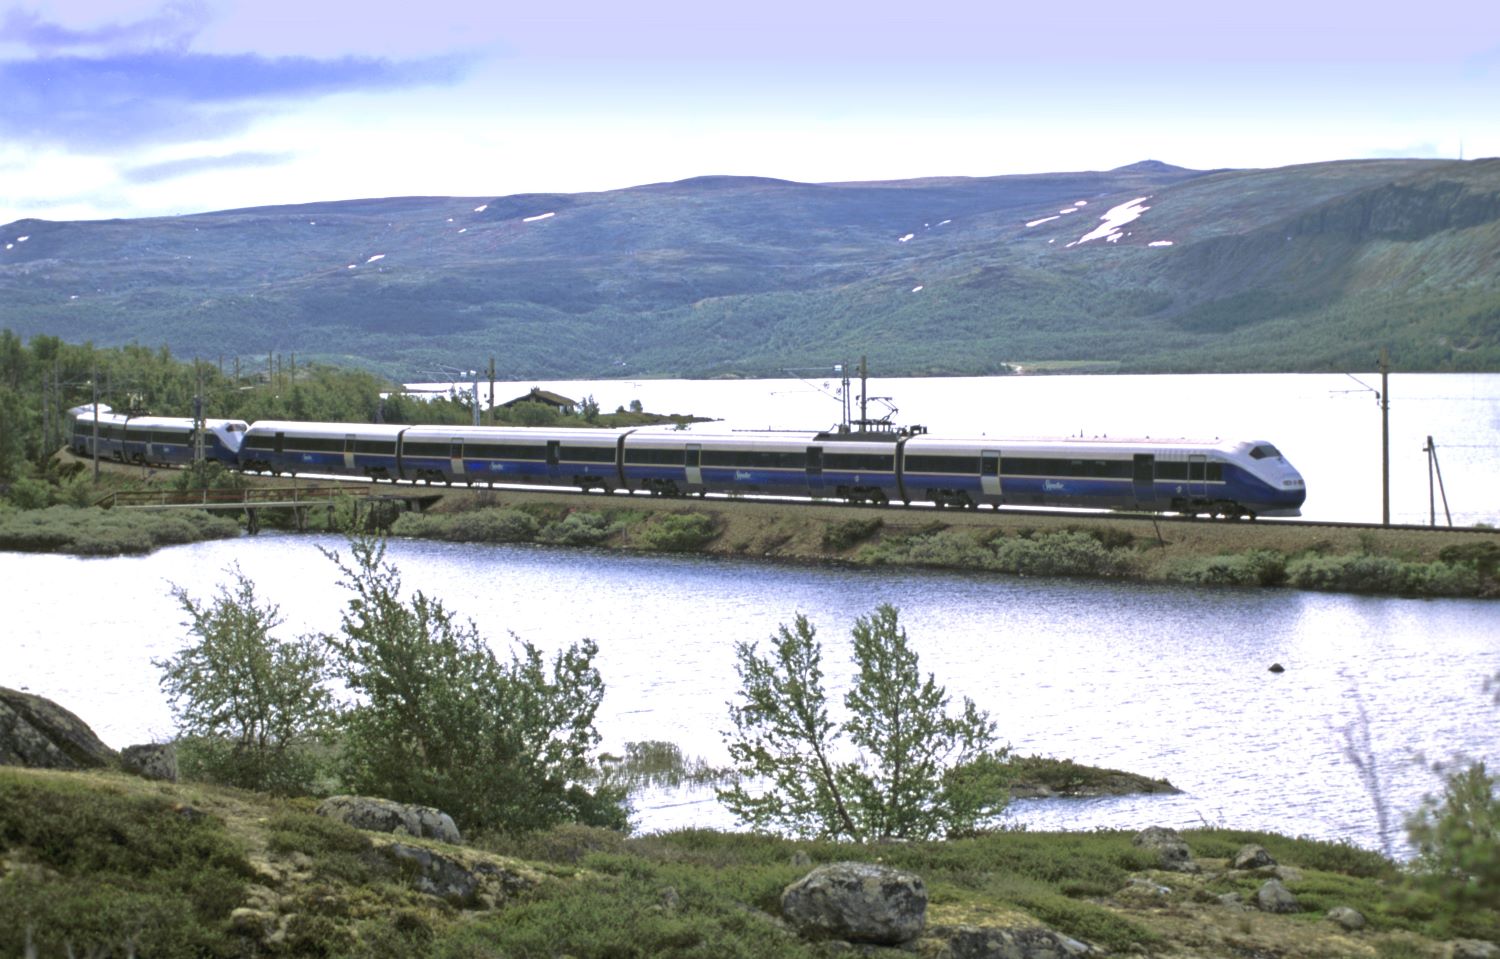 Transport - travelling to Bergen by train